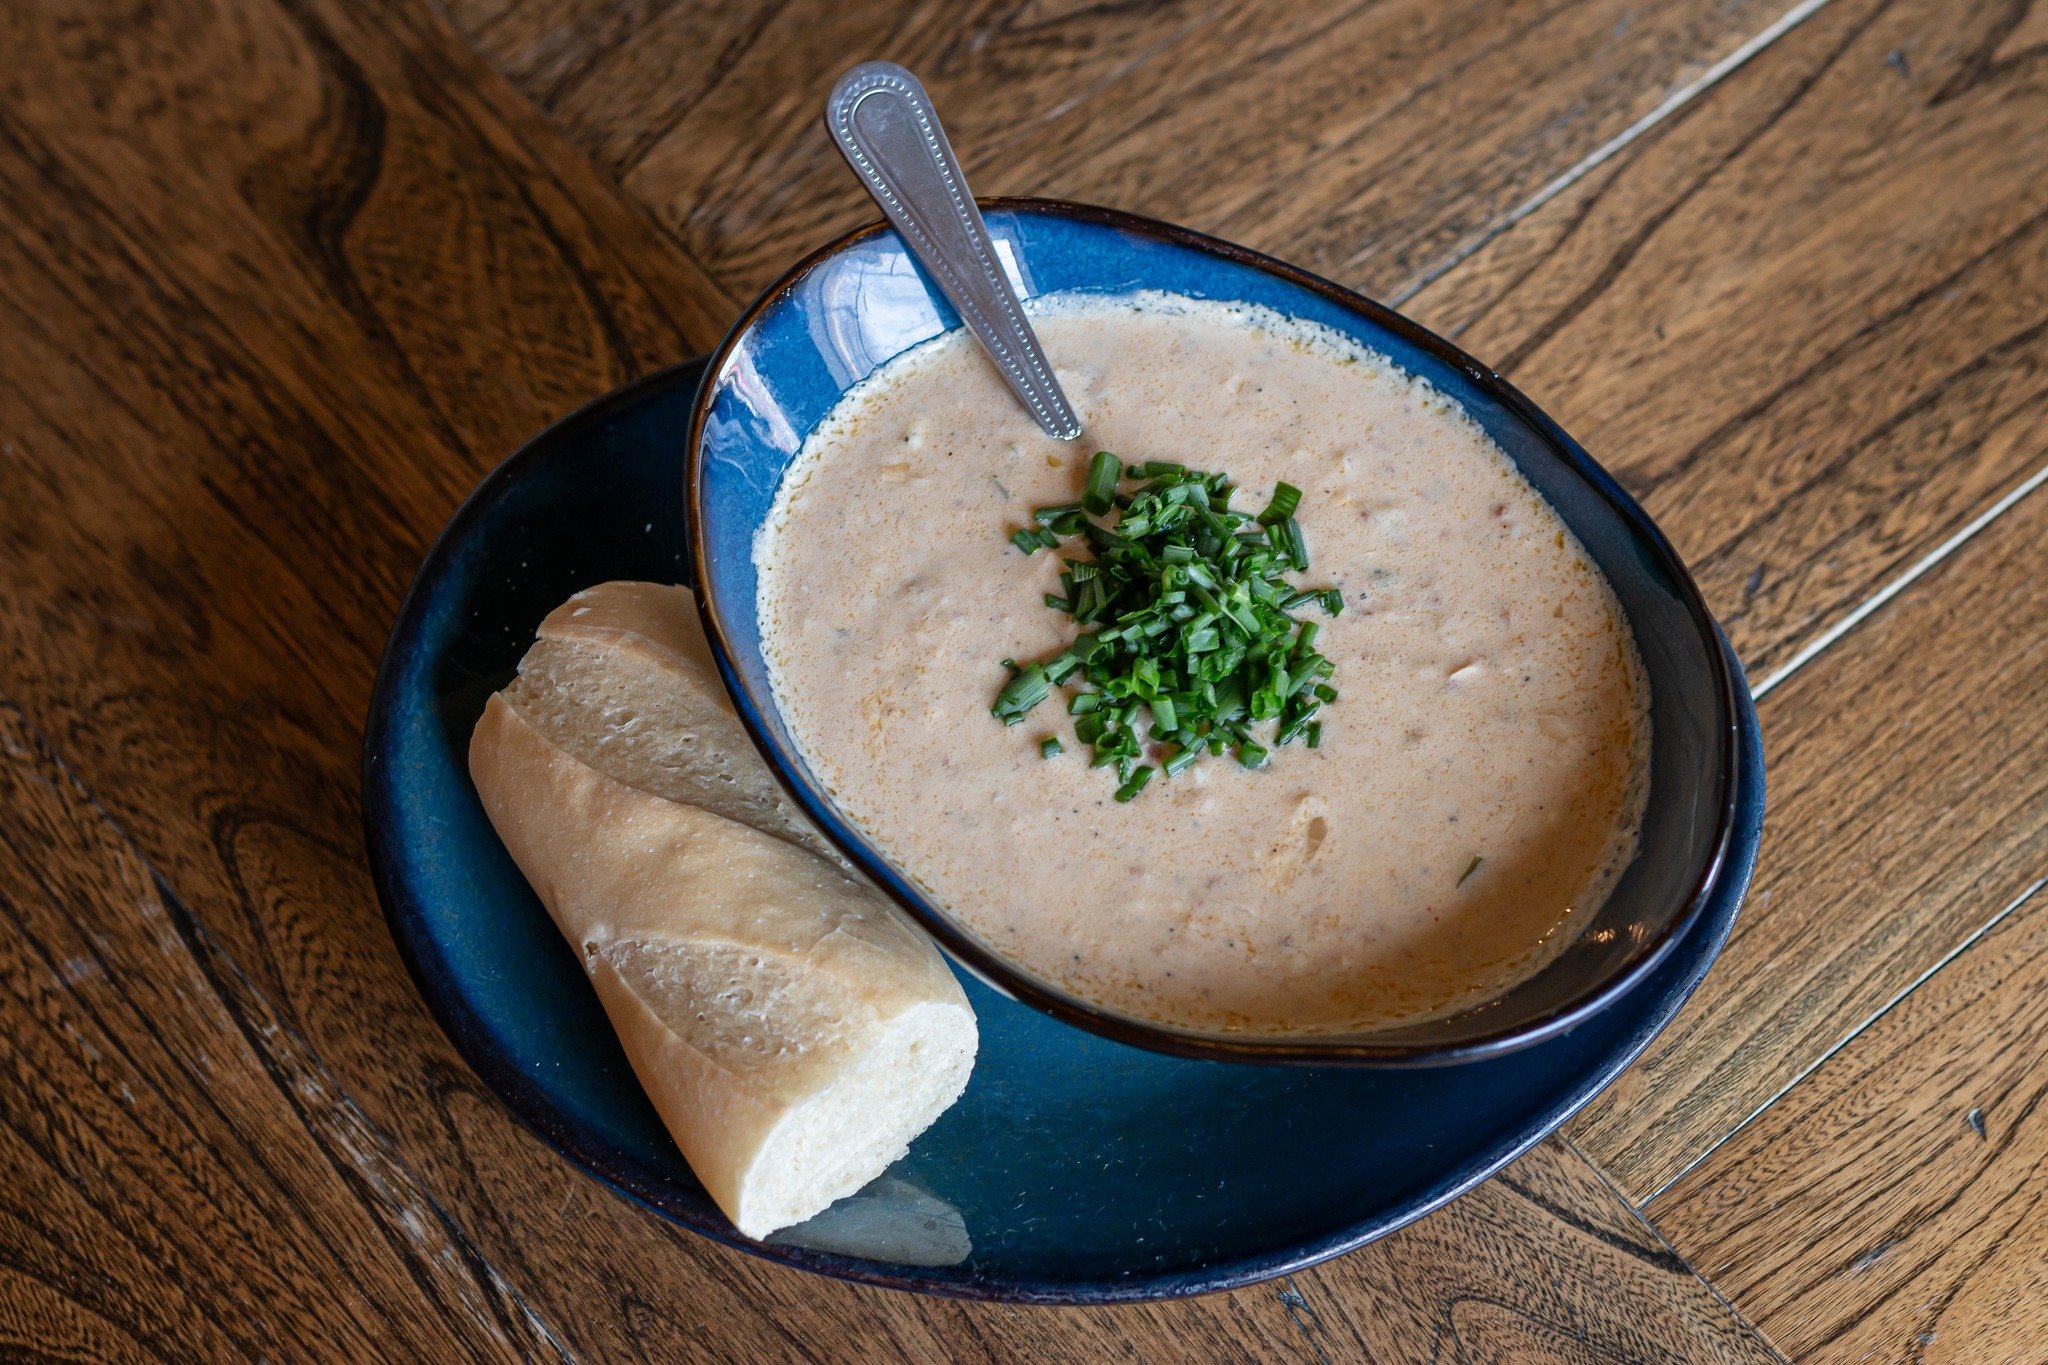 Last but certainly not least on our New Food Friday introduction is our Jalape&ntilde;o Popper Soup! 🌶️

We took your favorite spicy snack and turned it into a soup. We start with, of course, jalapeno, and proceed to add bacon, green pepper, chicken